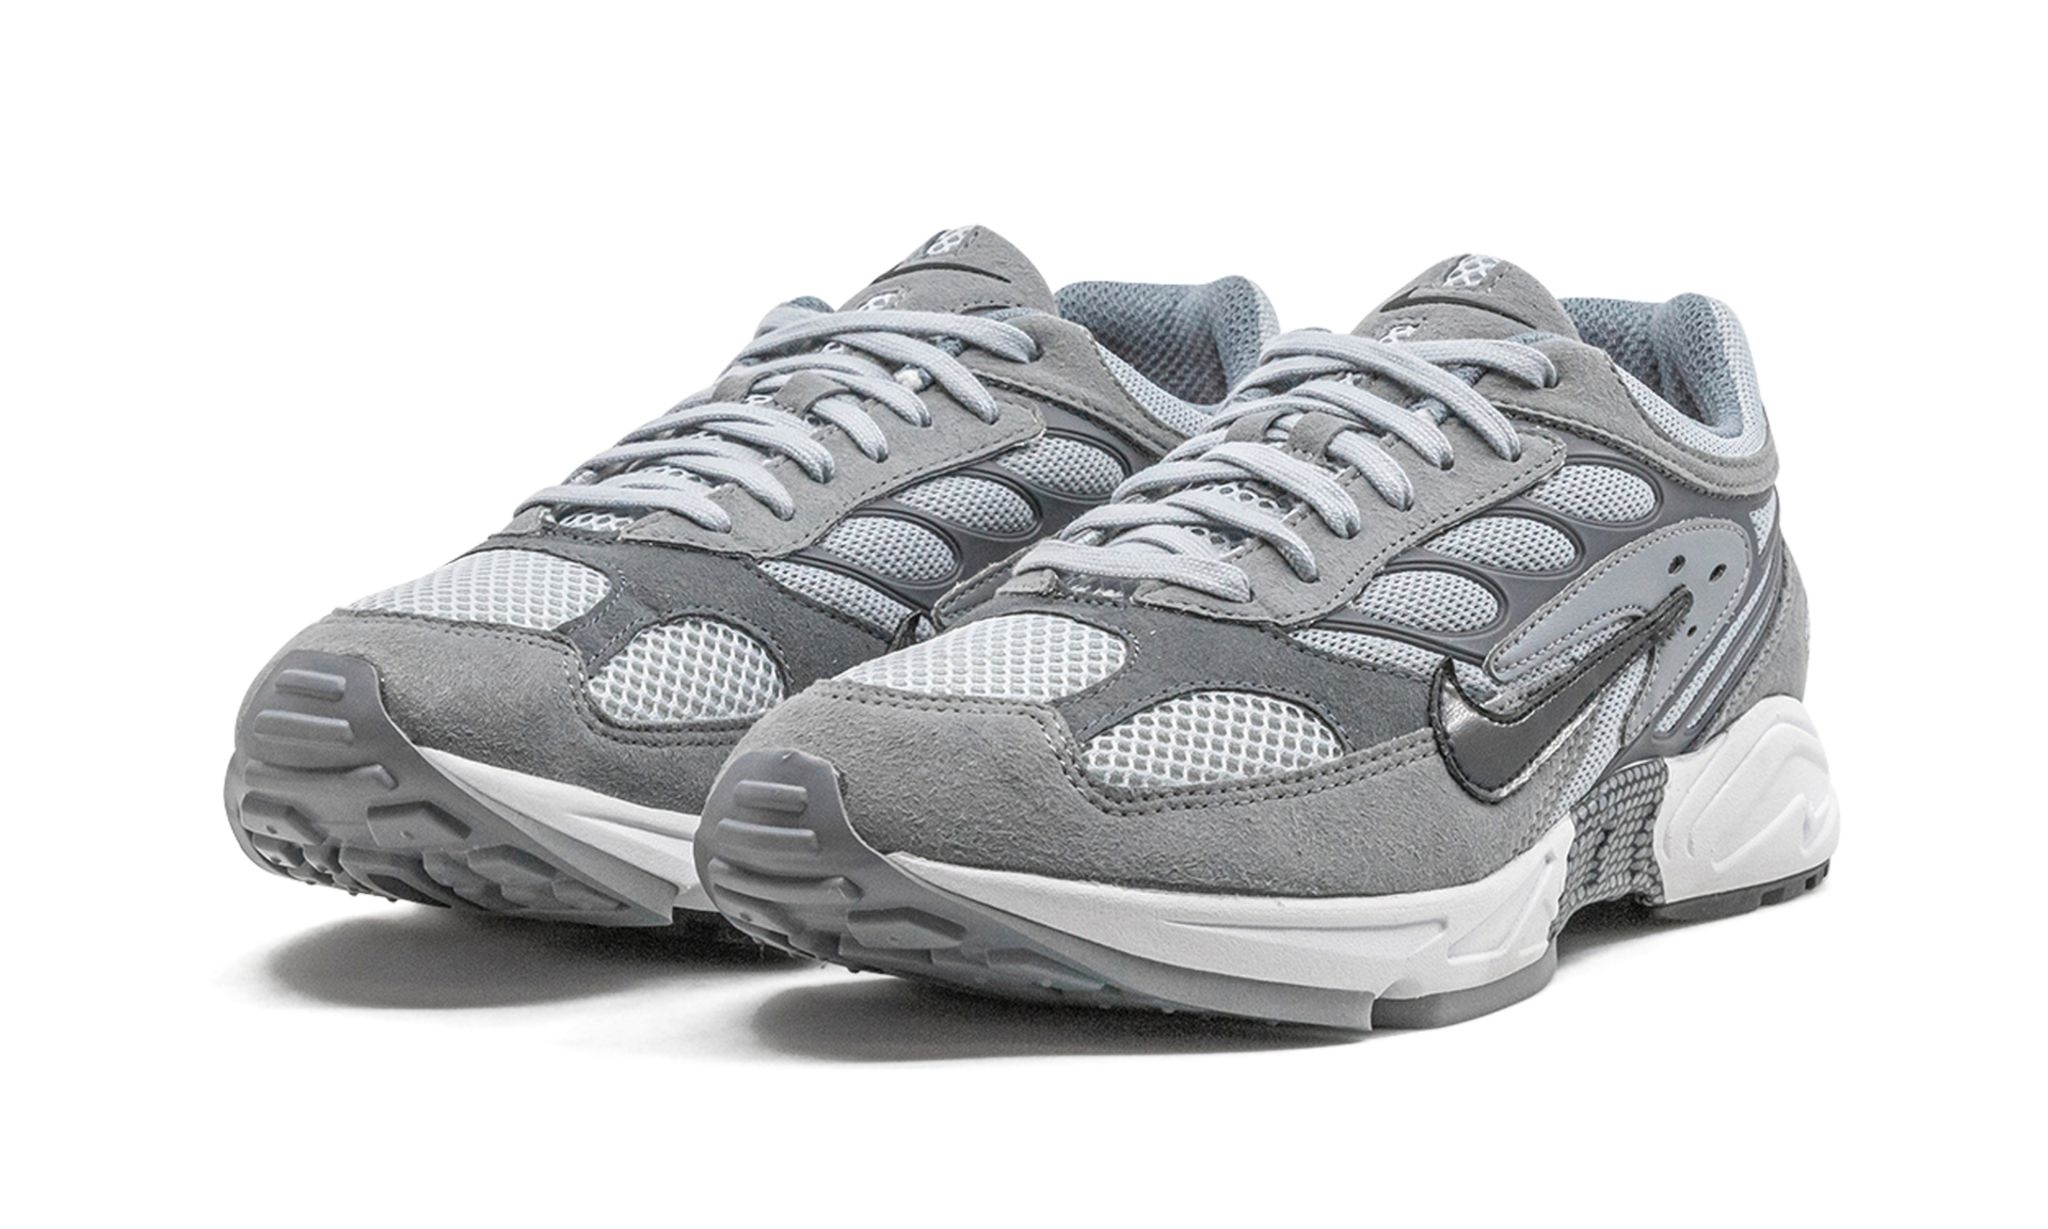 Ghost Racer "Cool Grey" - 2